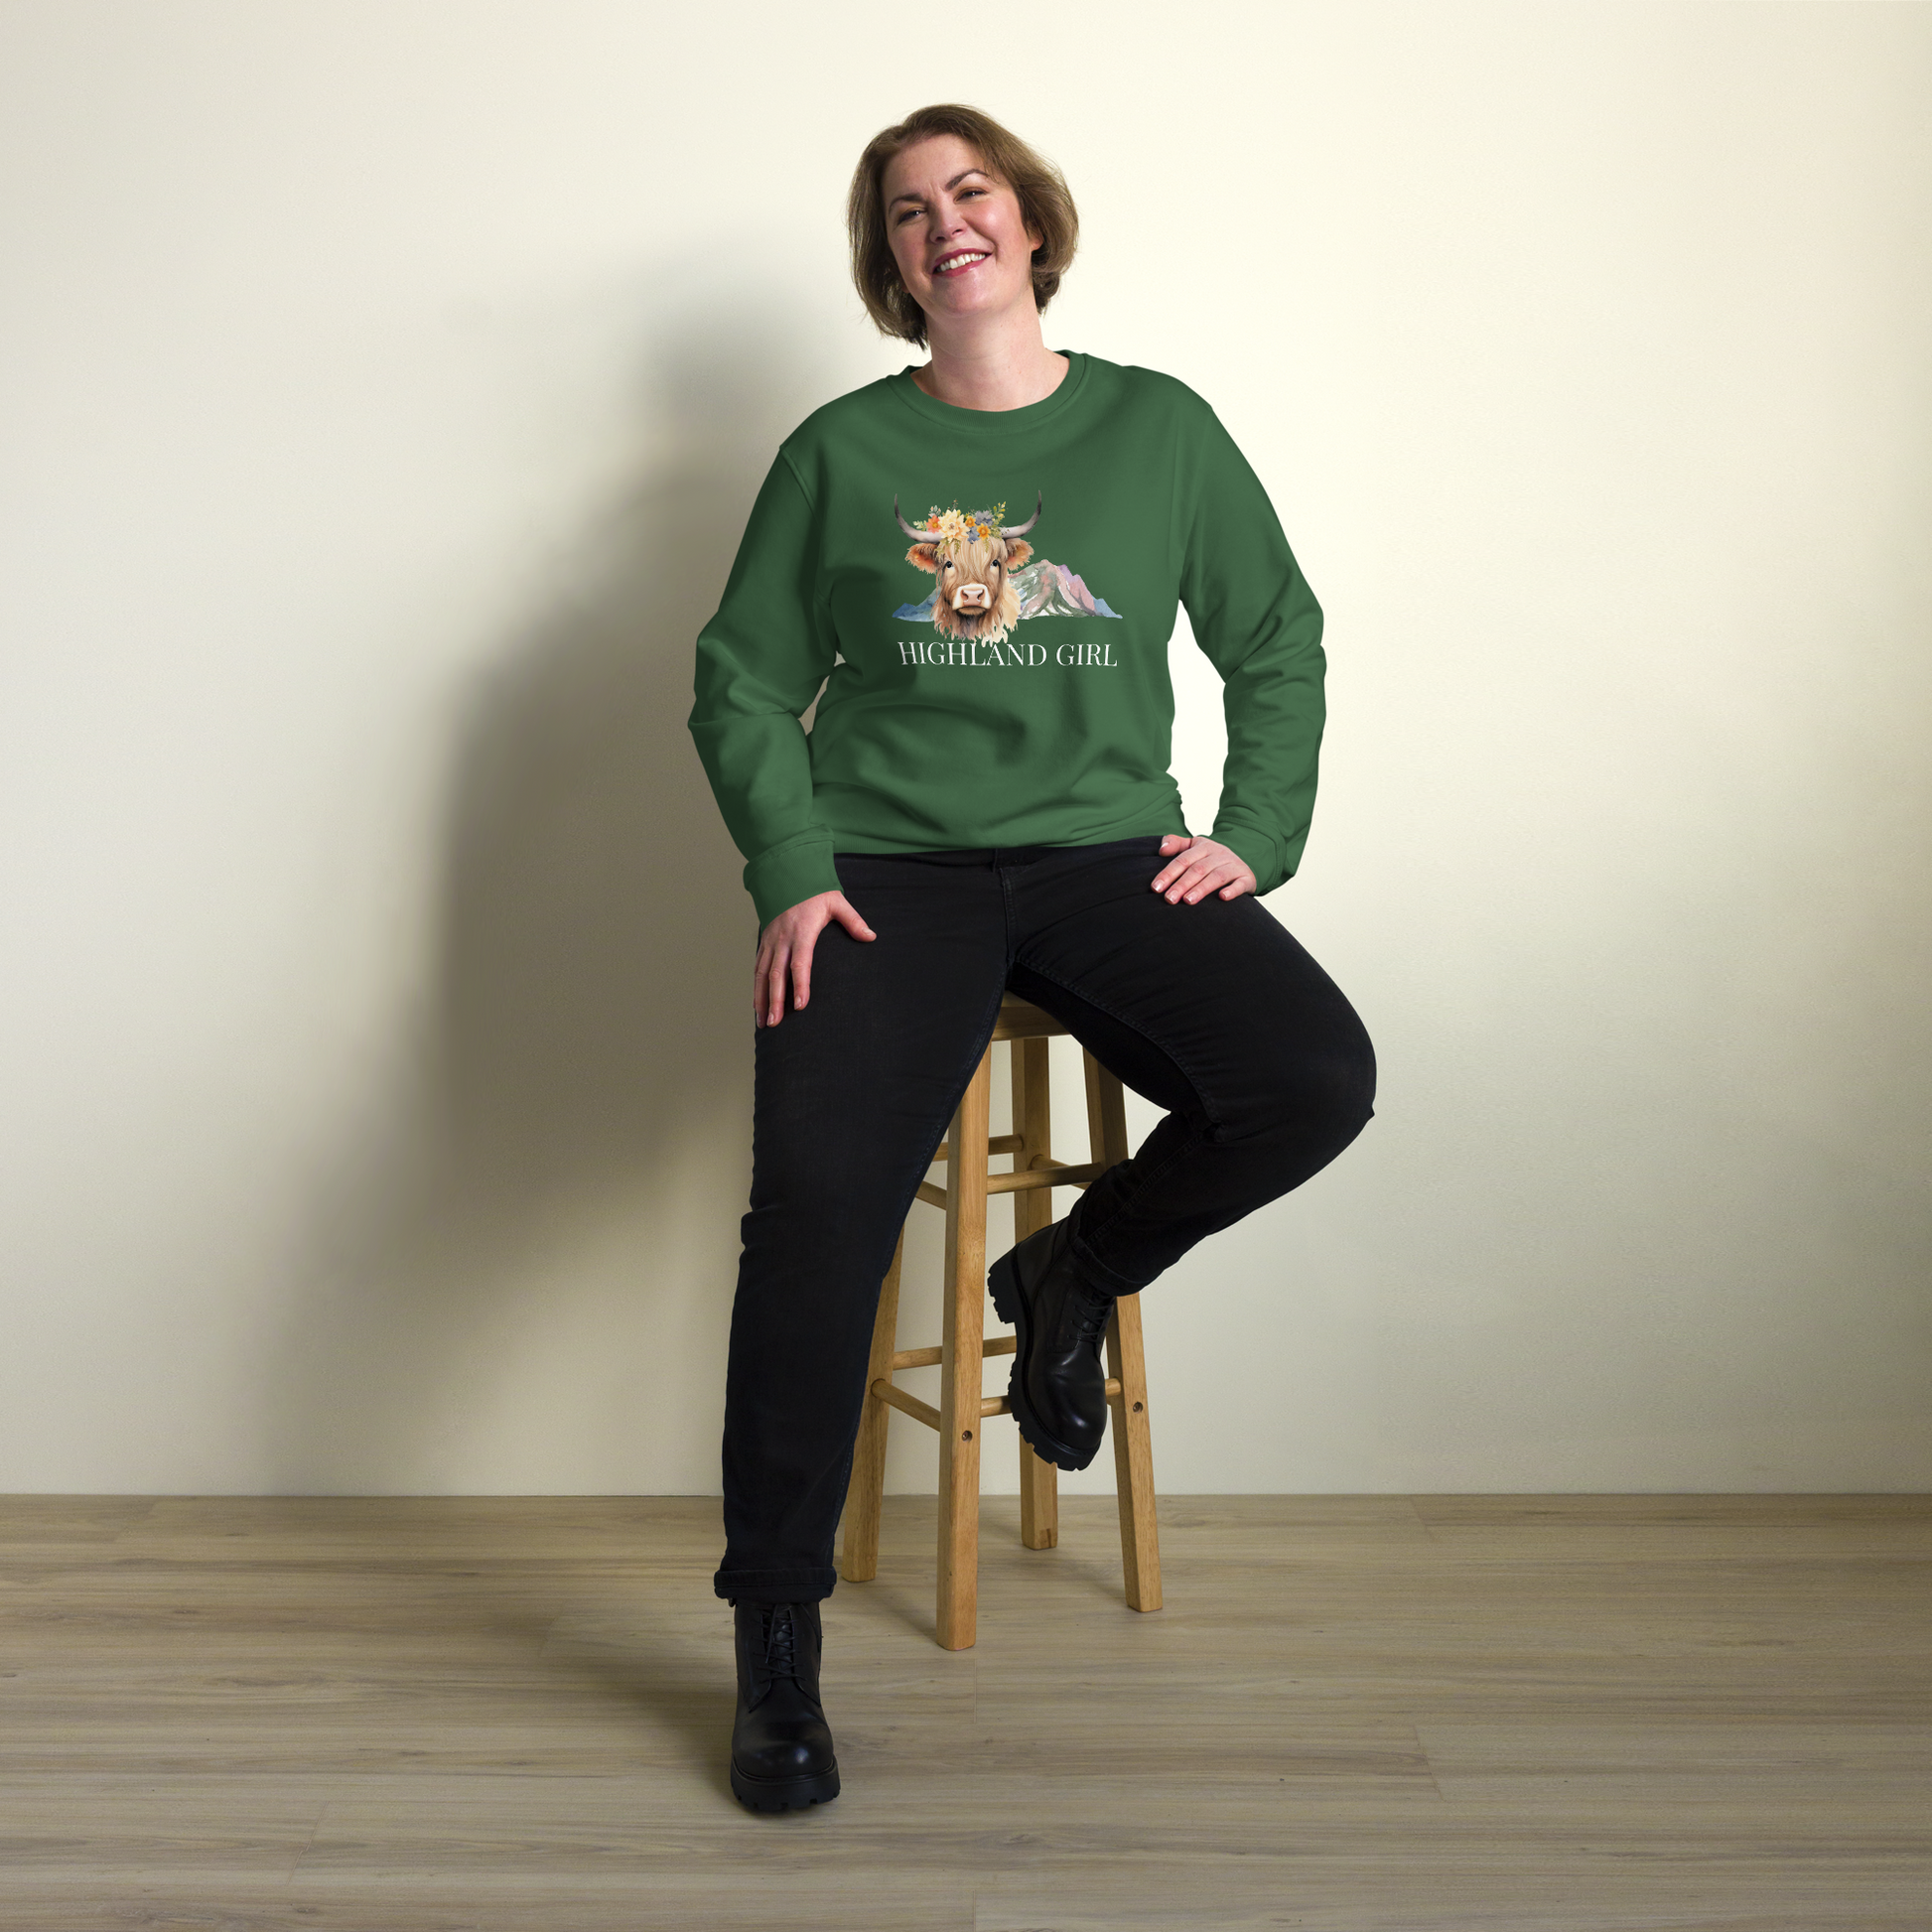 Smiling woman wearing a Bottle Green Organic Cotton Highland Cow Sweatshirt showcasing an adorable Highland Girl graphic on the chest - Cute Graphic Highland Cow Sweatshirts - Boozy Fox